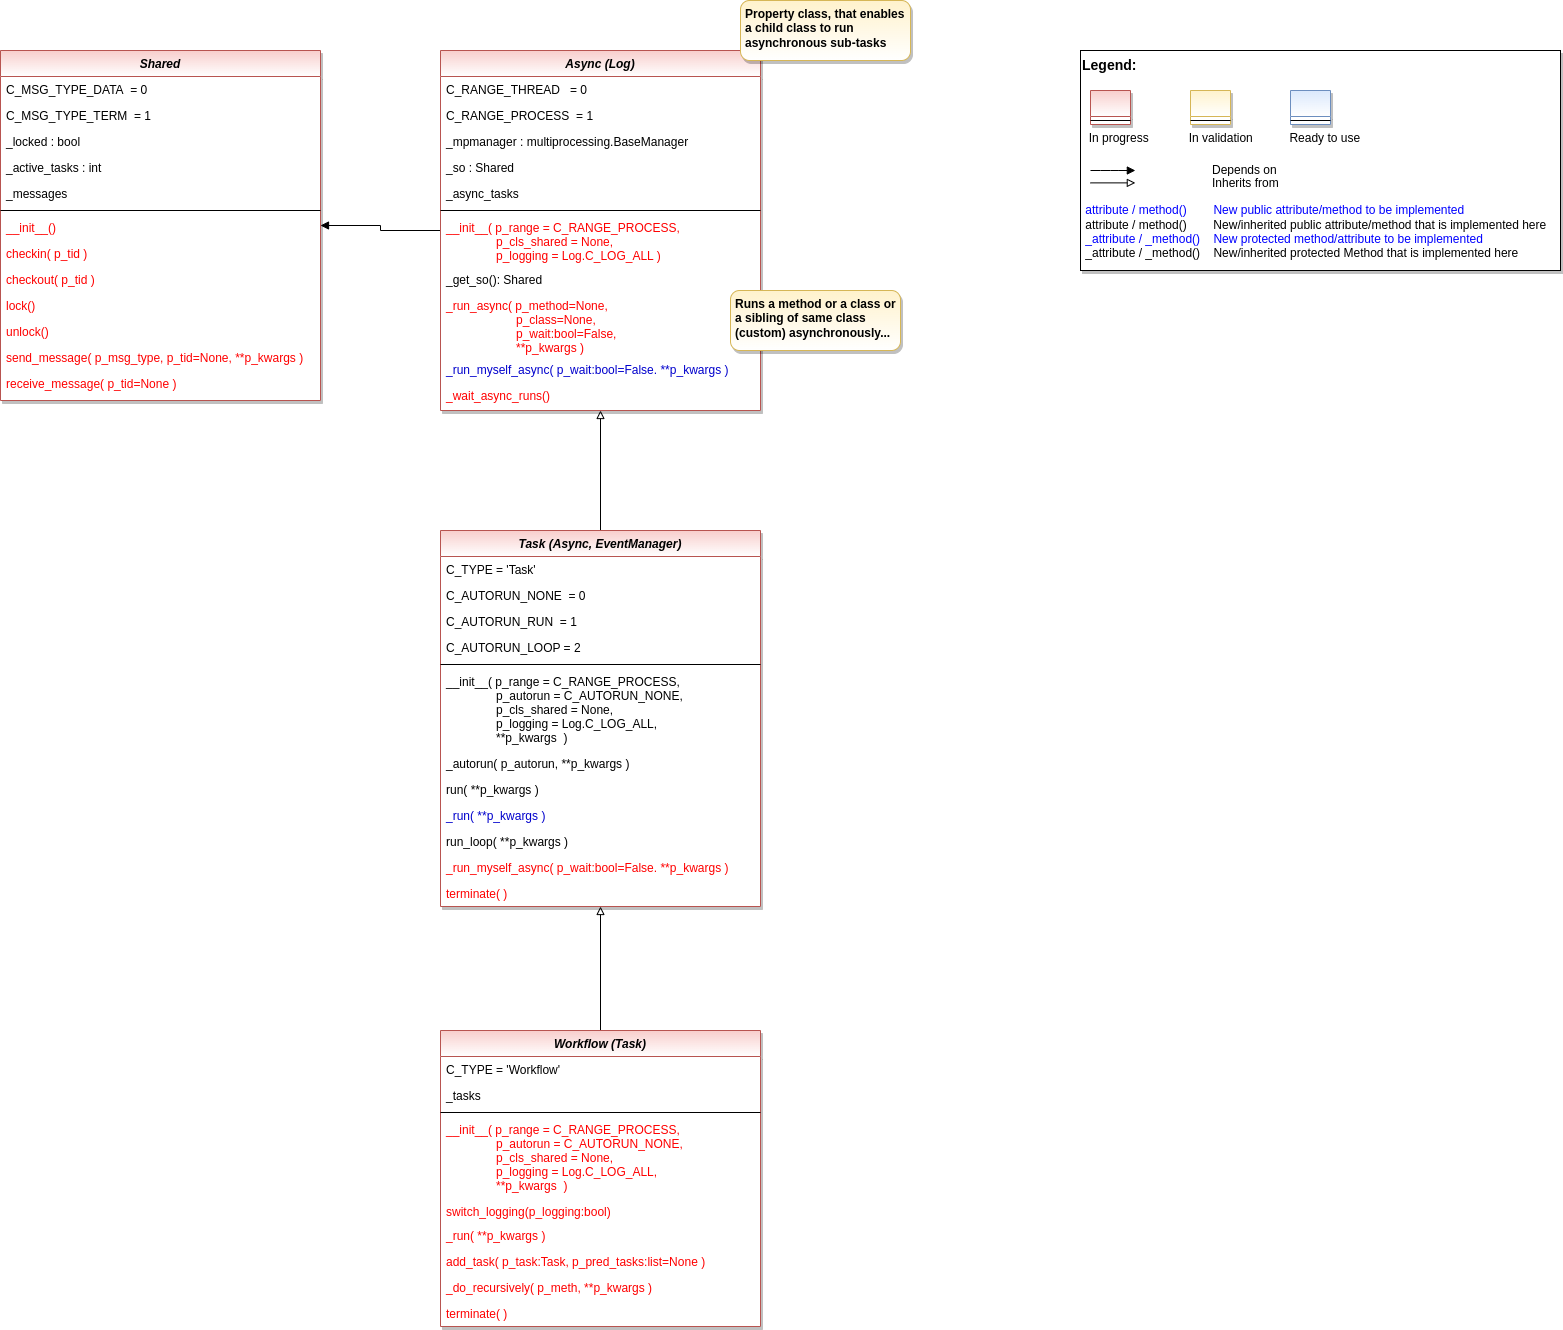 ../../../_images/MLPro-BF-MP_class_diagram.drawio.png